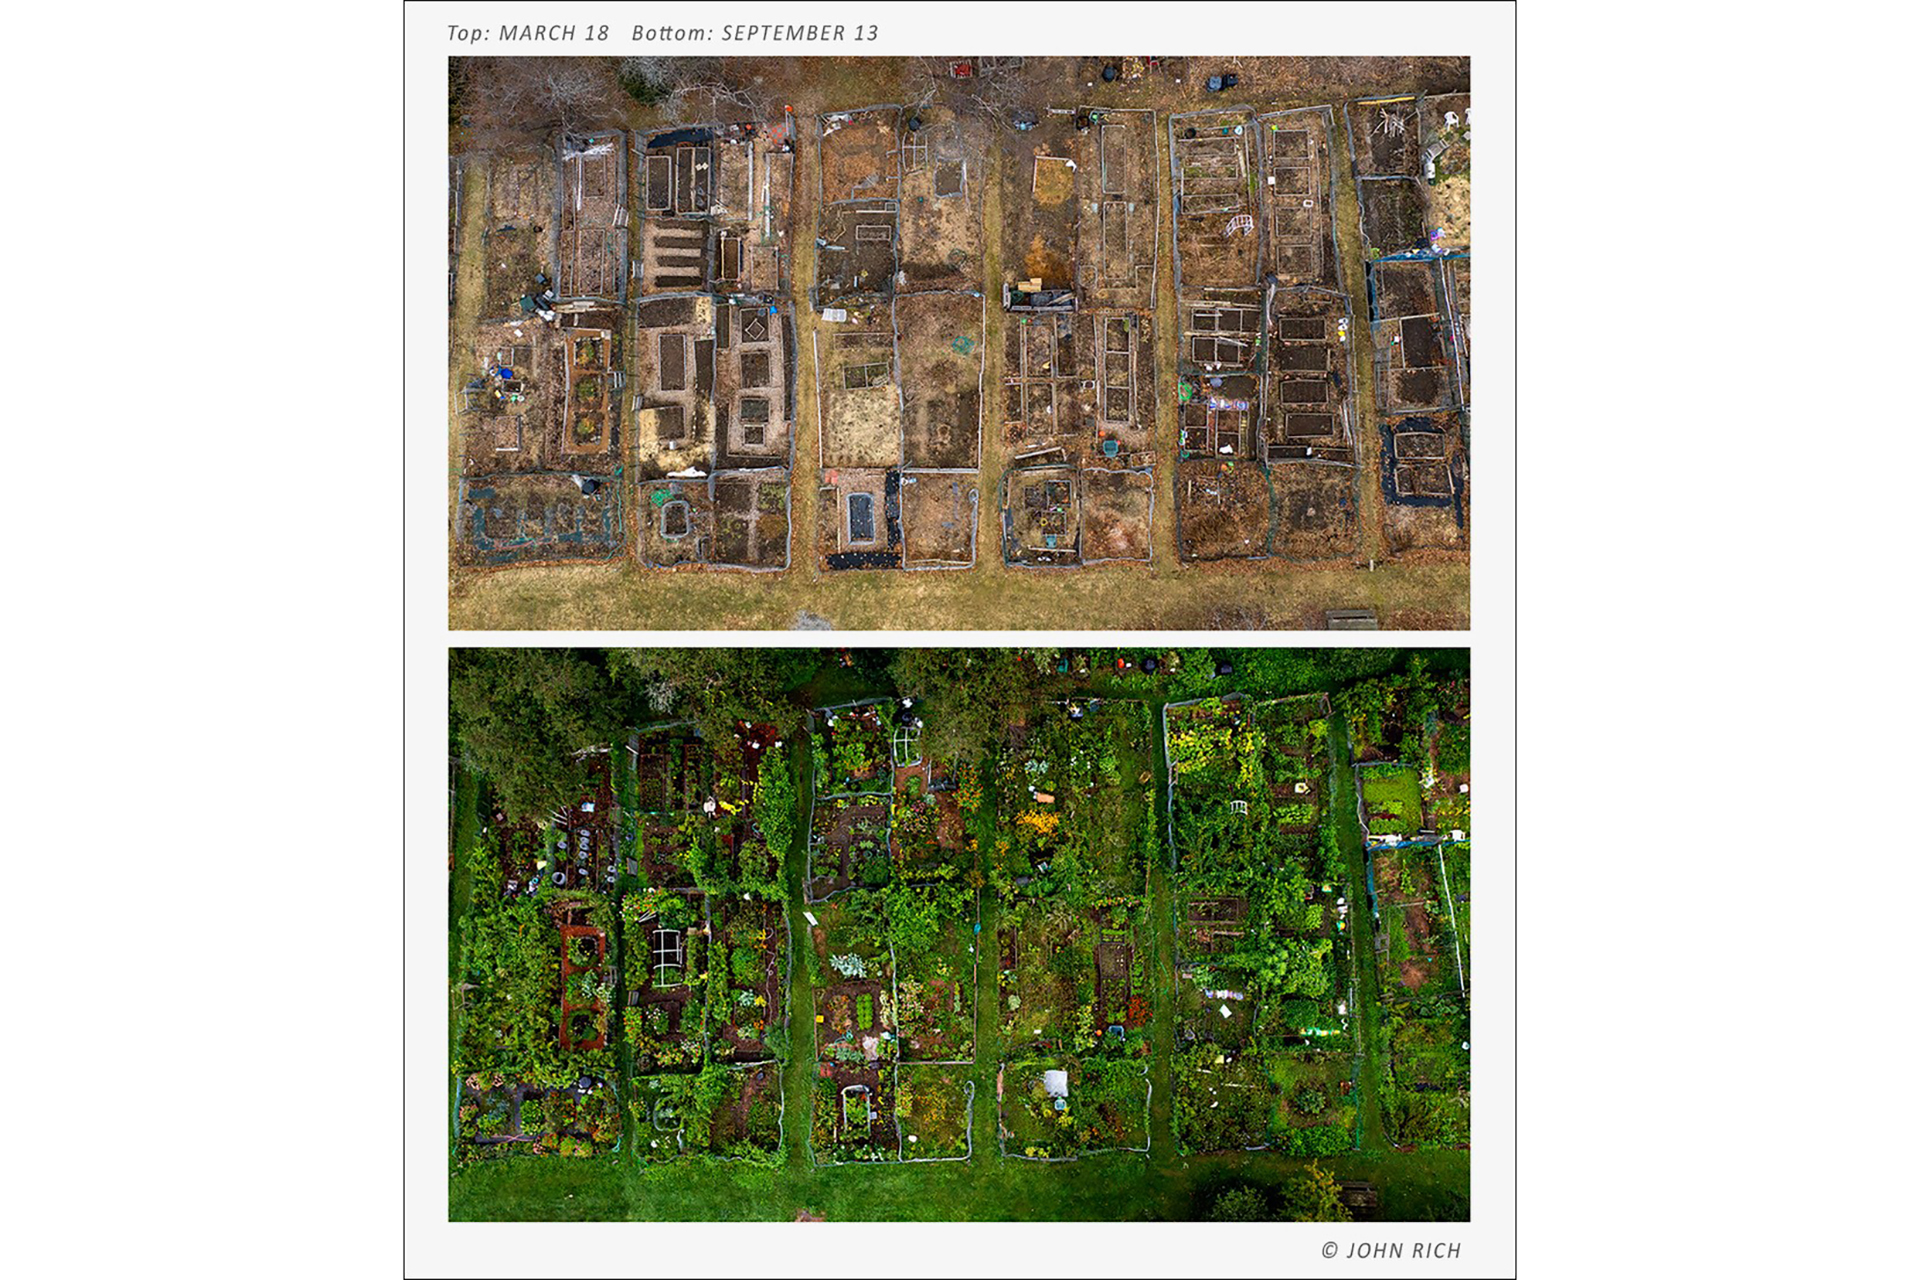 Two pictures of community gardens from a drone, the top taken on March 18 and the bottom on September 13